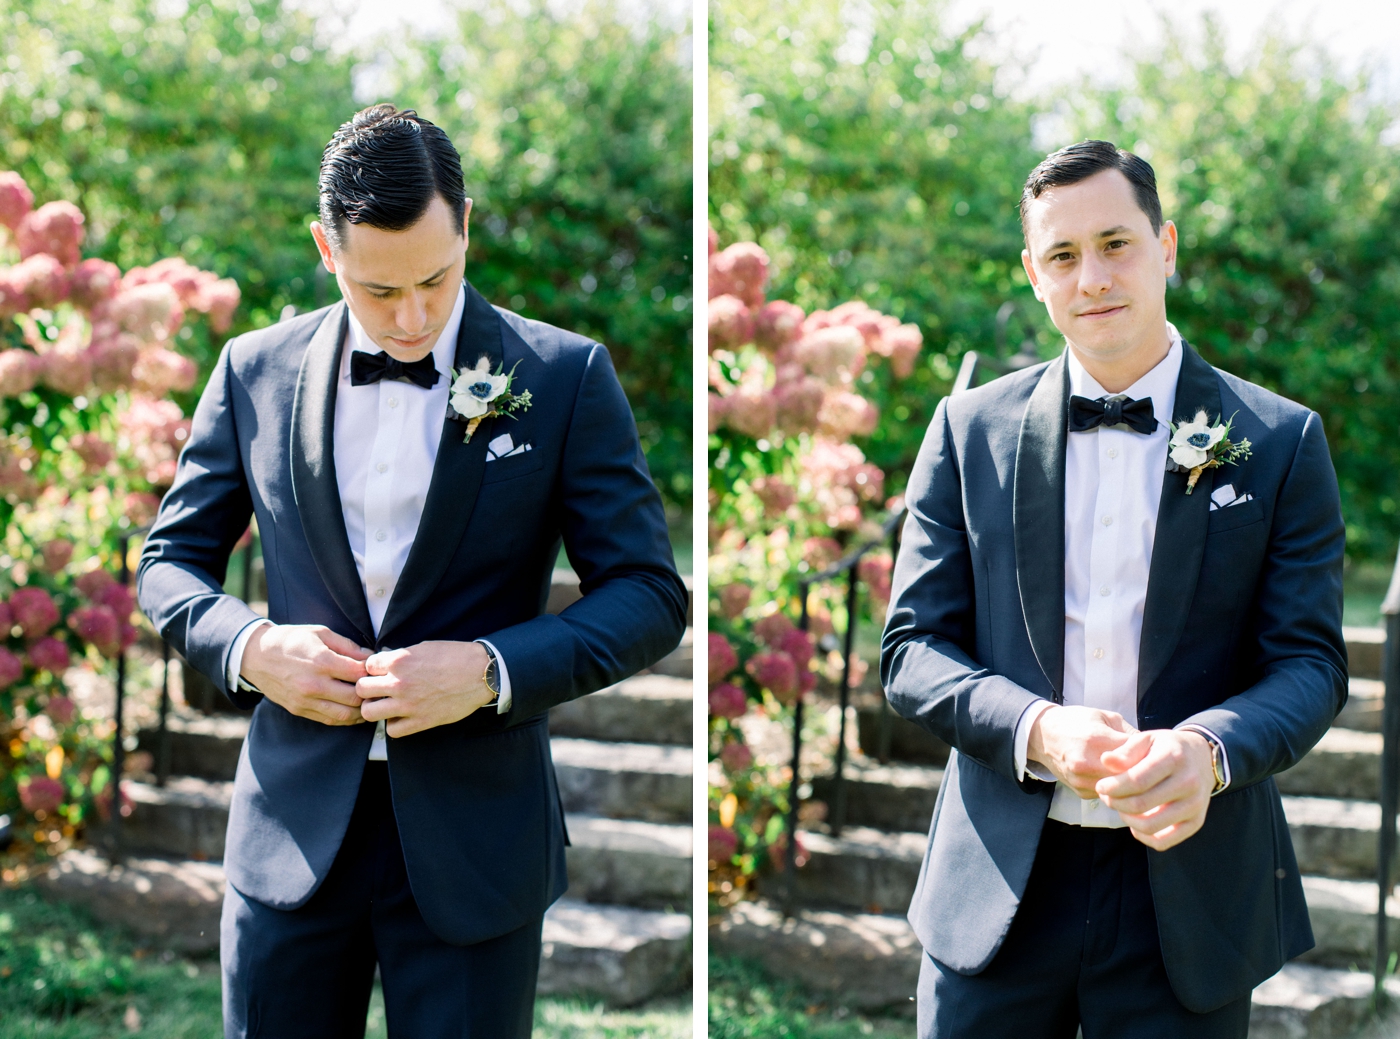 Groom in a tuxedo from The Black Tux